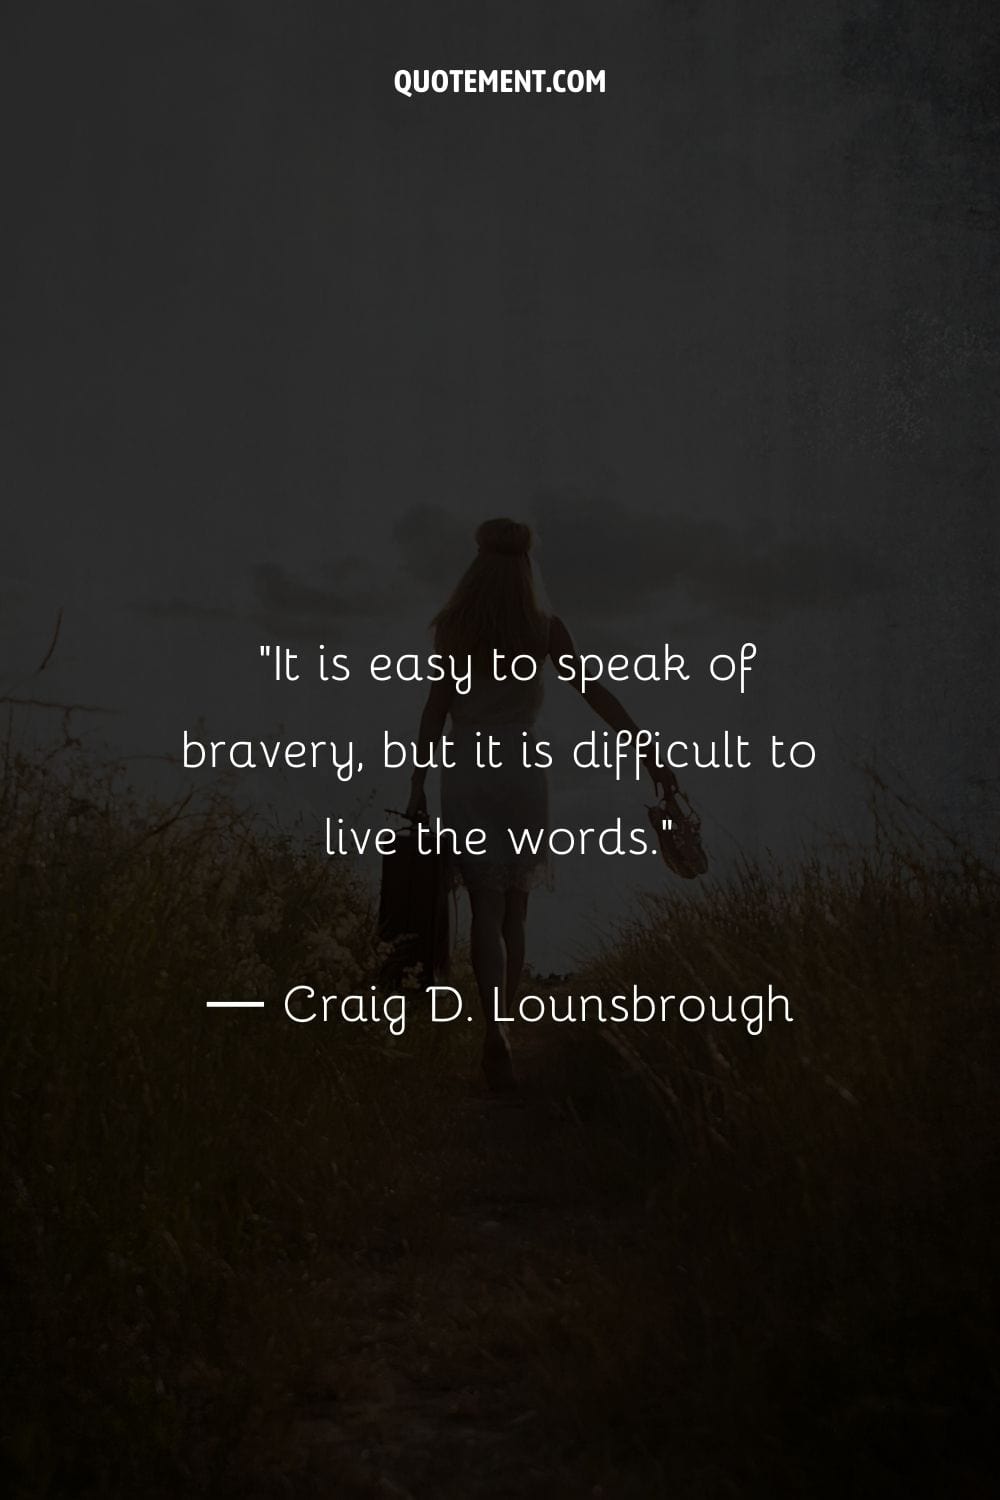 It is easy to speak of bravery, but it is difficult to live the words